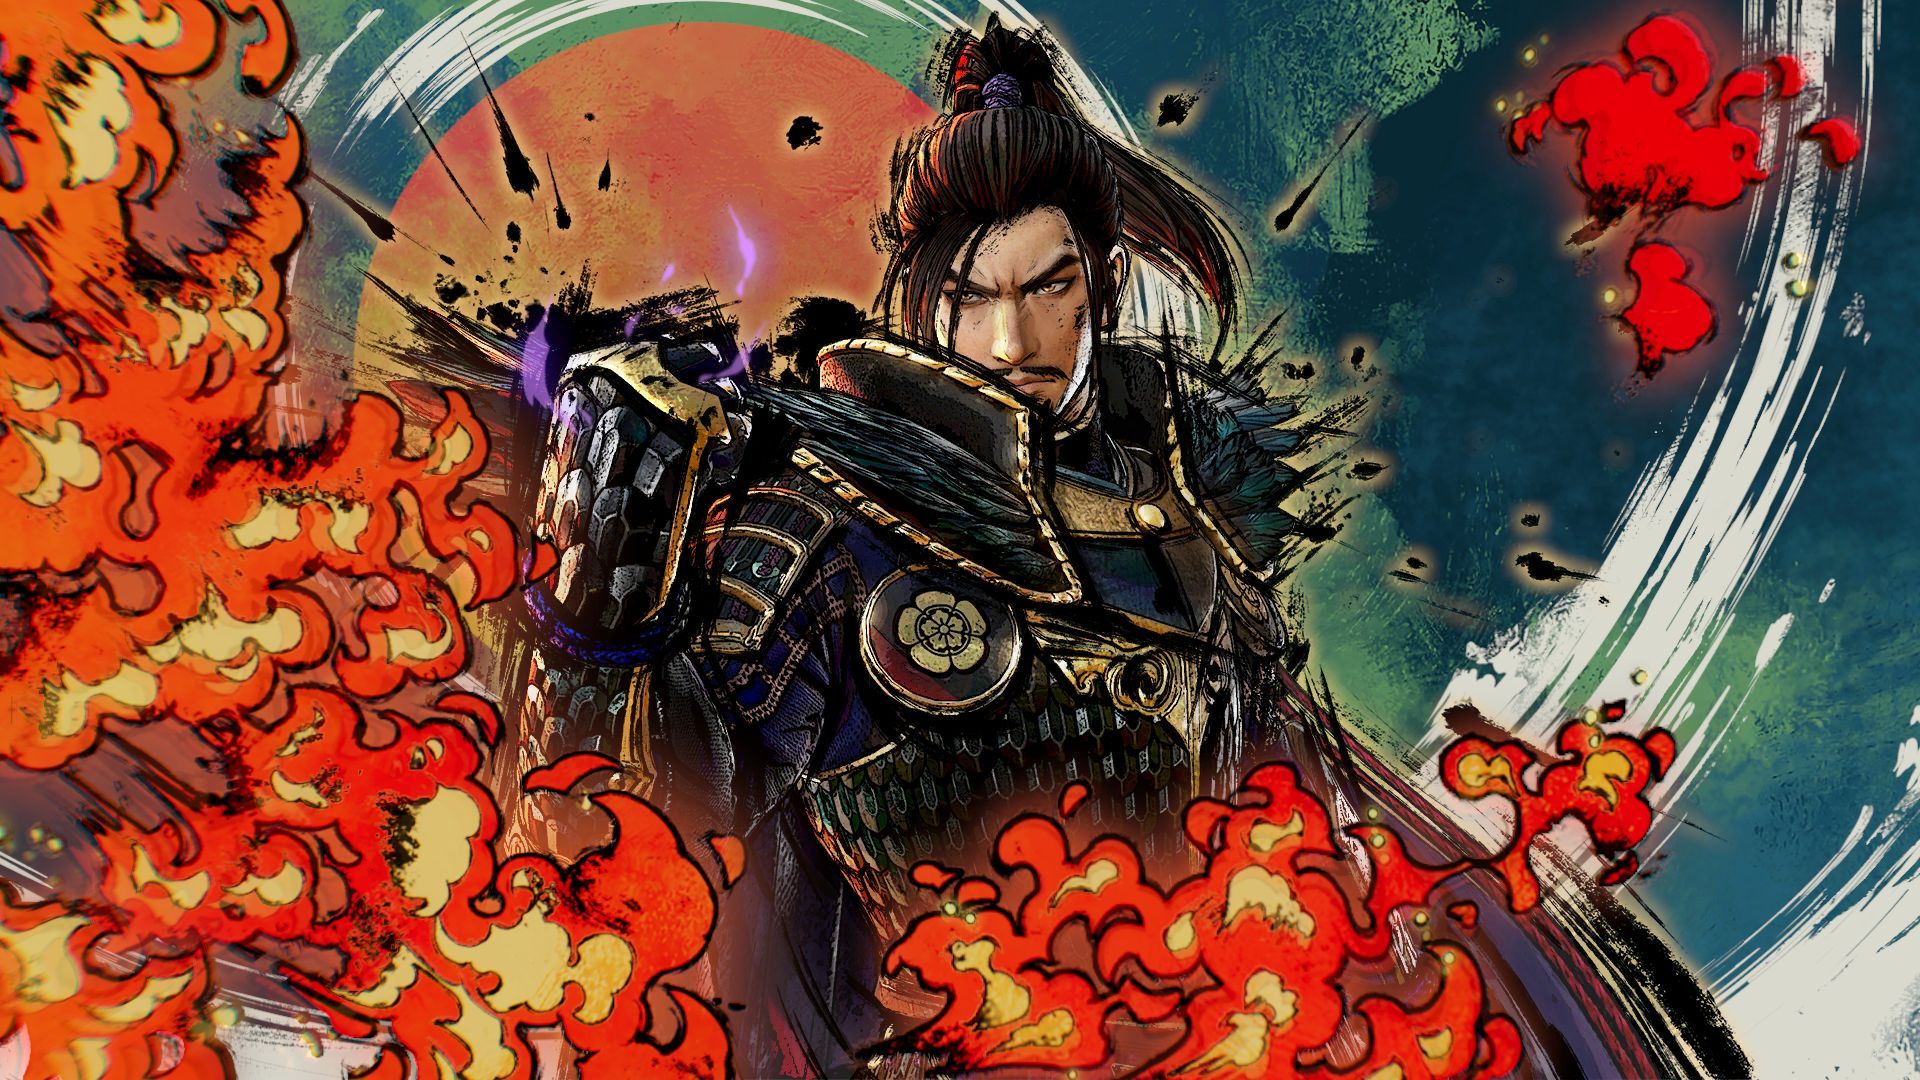 Samurai Warriors 5 Q&A With Hisashi Koinuma V 000 Could Become A Thing Of The Past On Next Gen